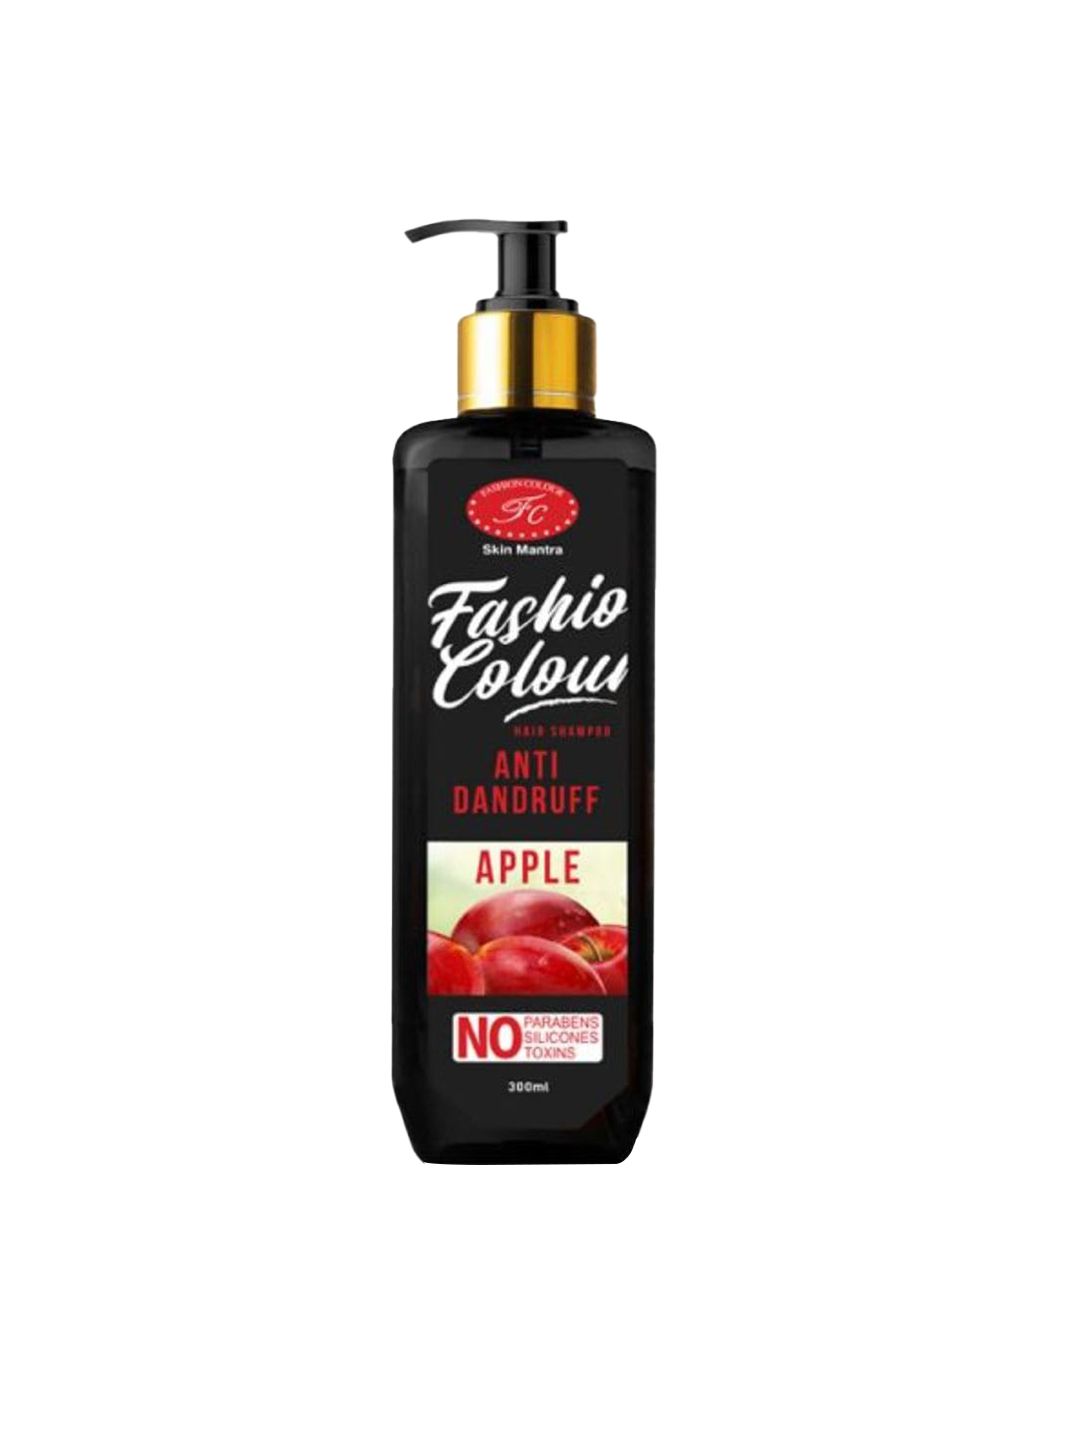 Fashion Colour Anti-Dandruff Shampoo with Apple Extracts - 300ml Price in India